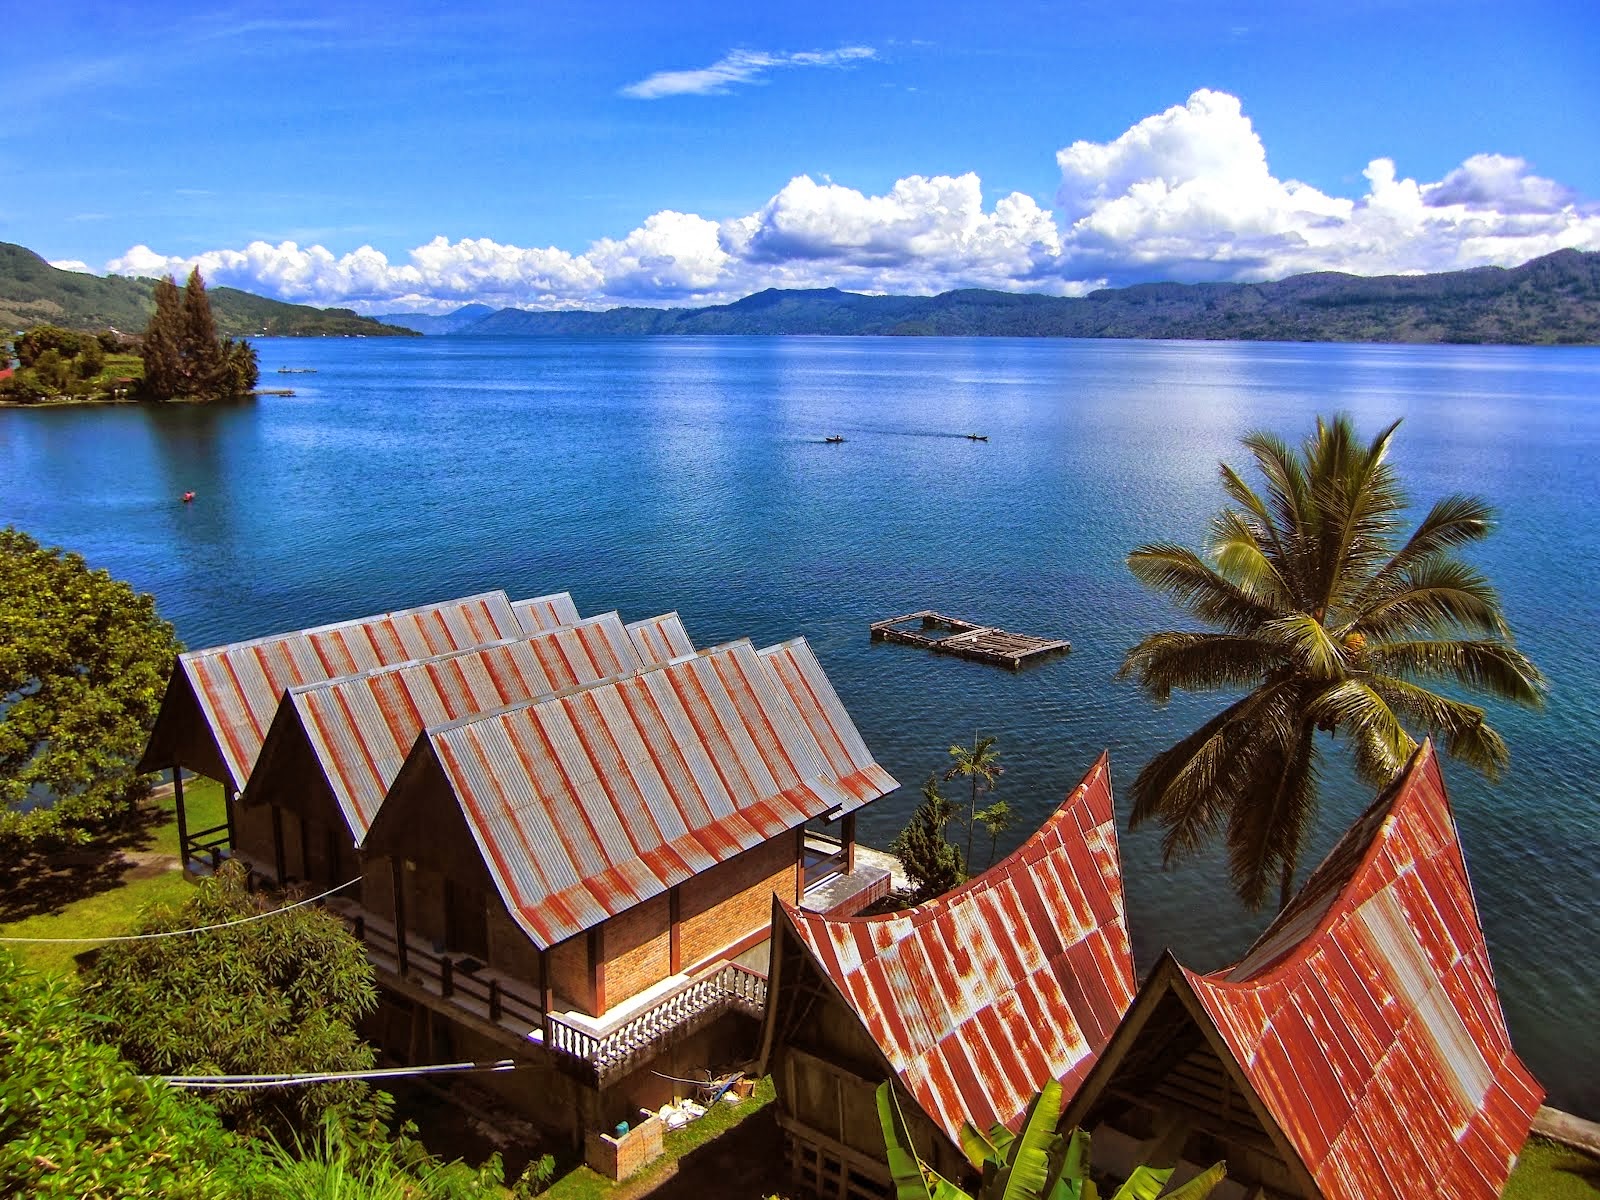 Medan: Entry Point to North Sumatra | Visit Indonesia Culture